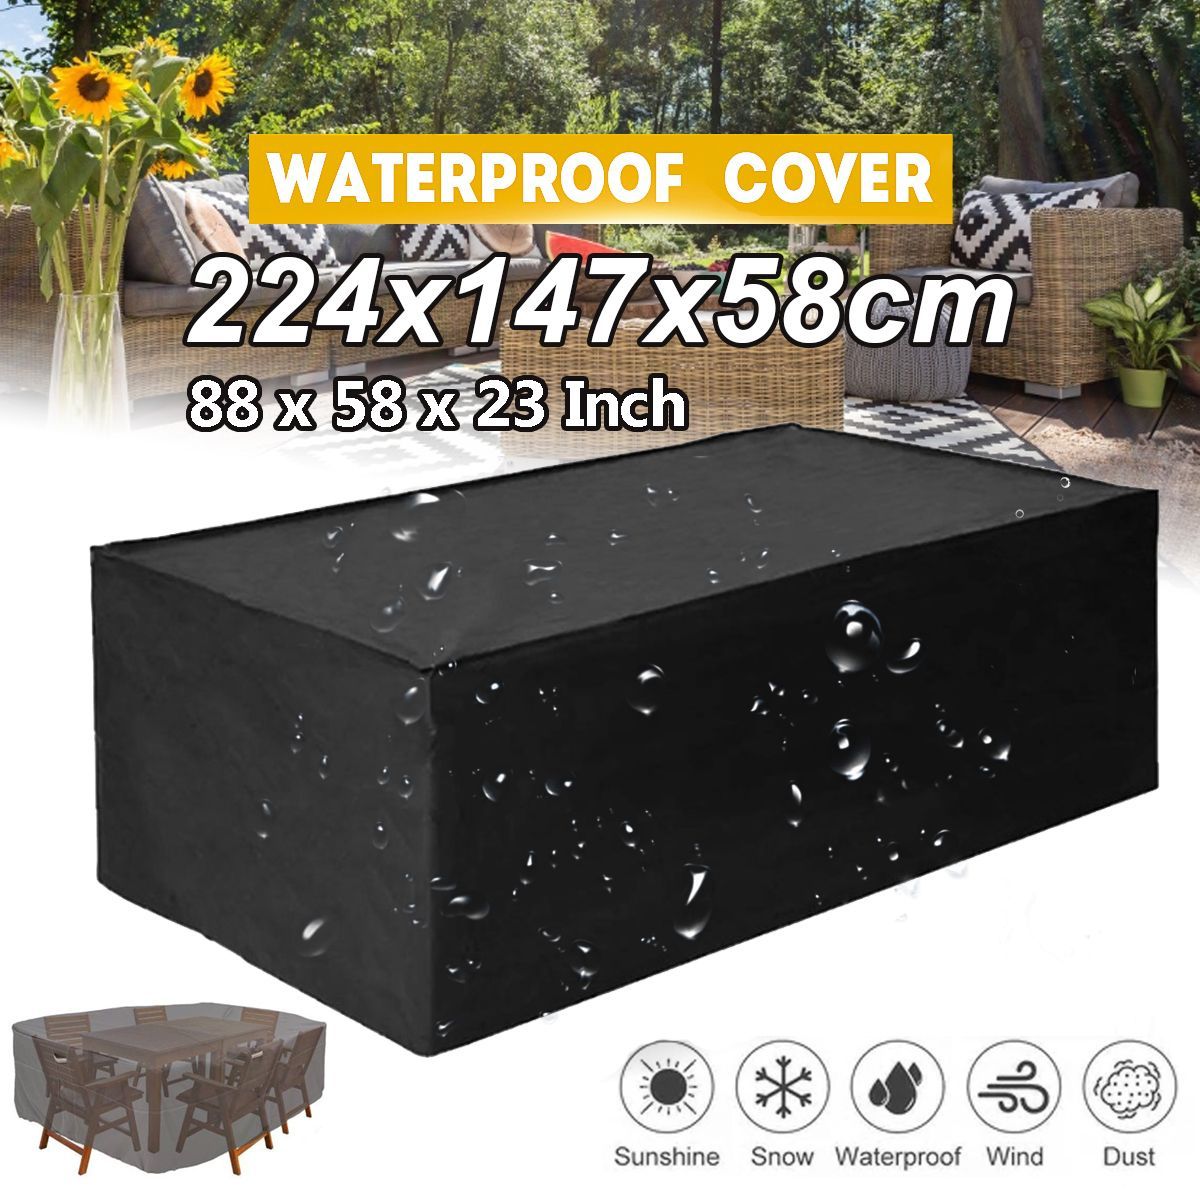 210D-Outdoor-Furniture-Cover-Table-Chair-Shelter-Anti-Dust-Rain-UV-Waterproof-1673079